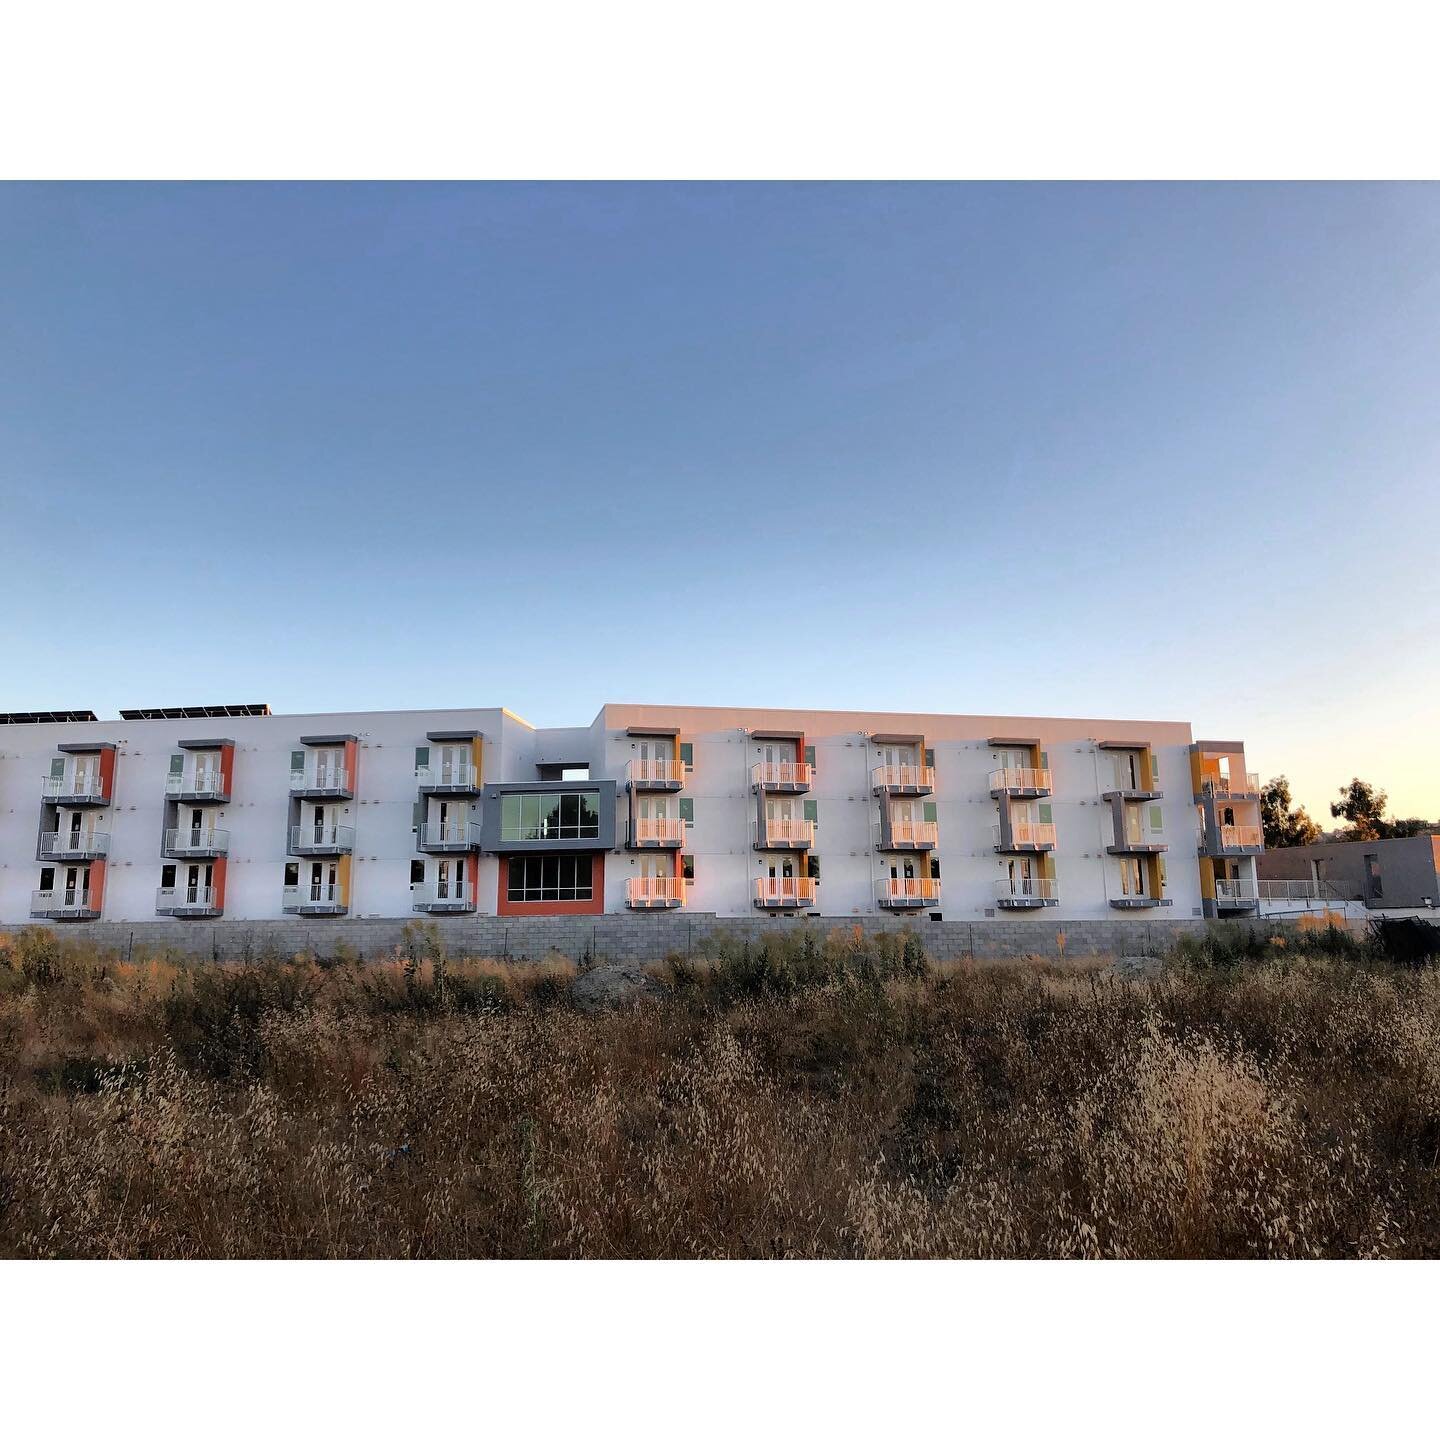 Buckingham Senior Affordable Housing is approaching completion. We think it looks great at sunset.🔸🔸🔸